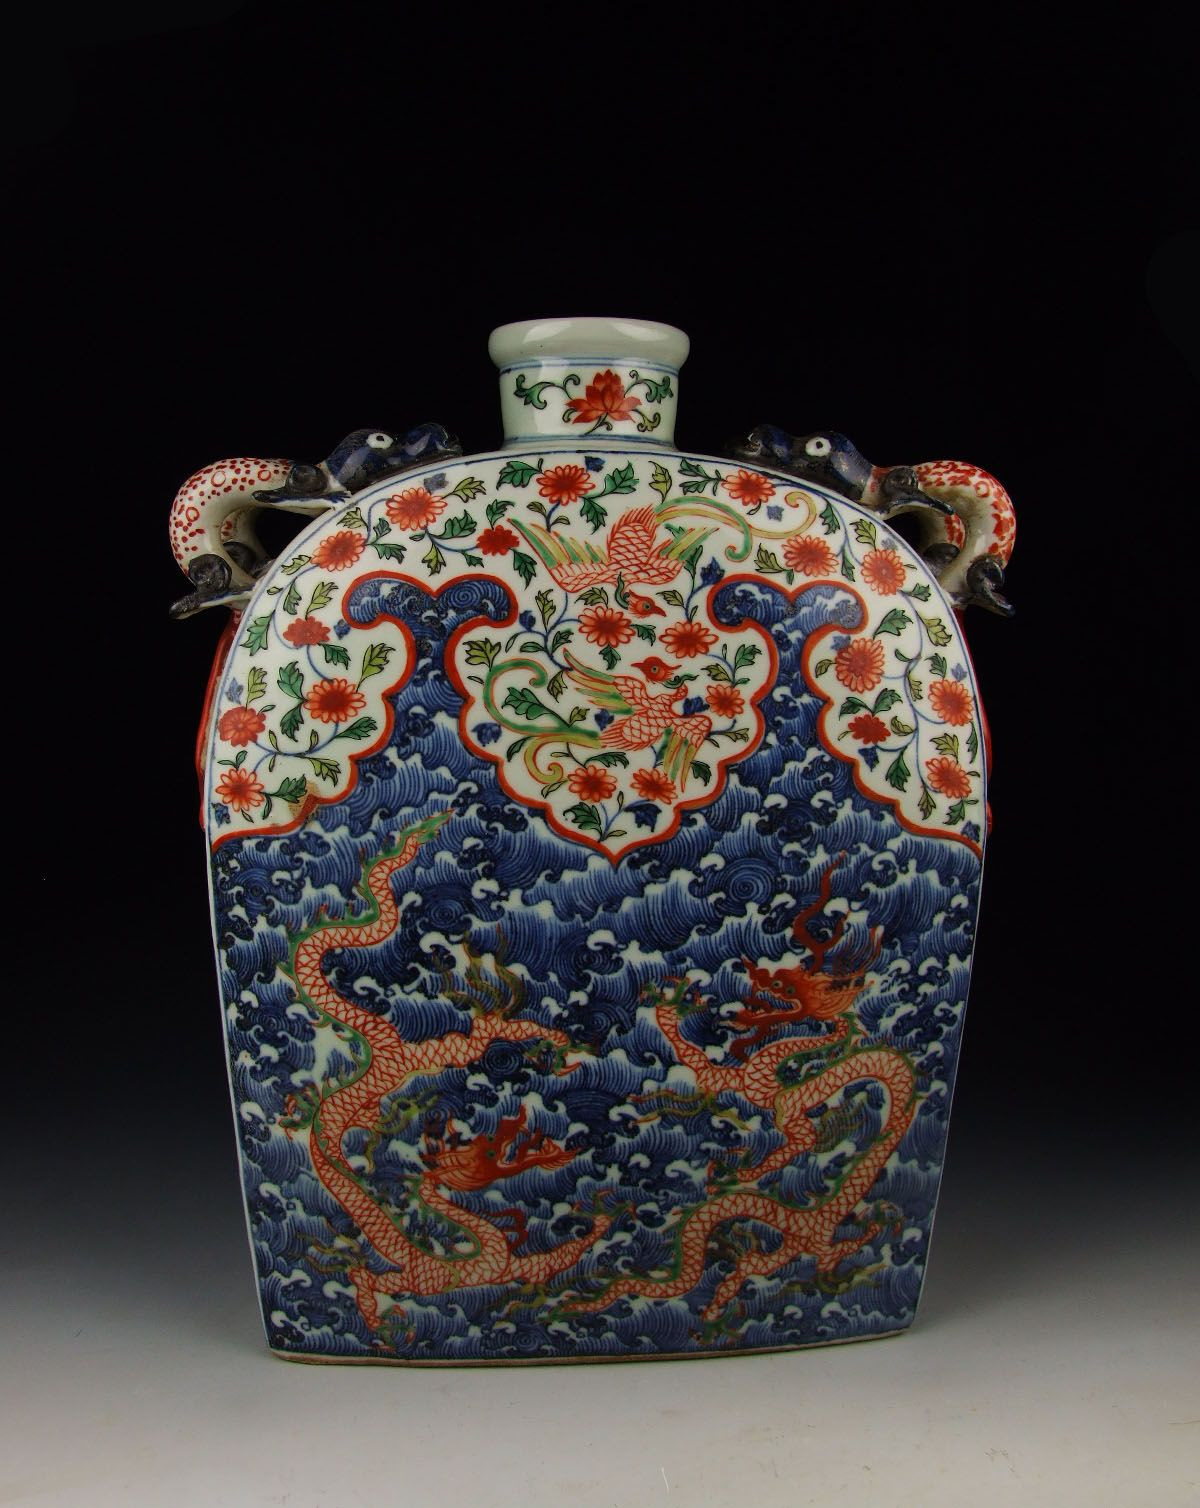 chinese flower vase porcelain of ming dynasty jiajing reign five colored and blue underglaze pertaining to ming dynasty jiajing reign five colored and blue underglaze decoration porcelain square flat vase with sea dragon pattern